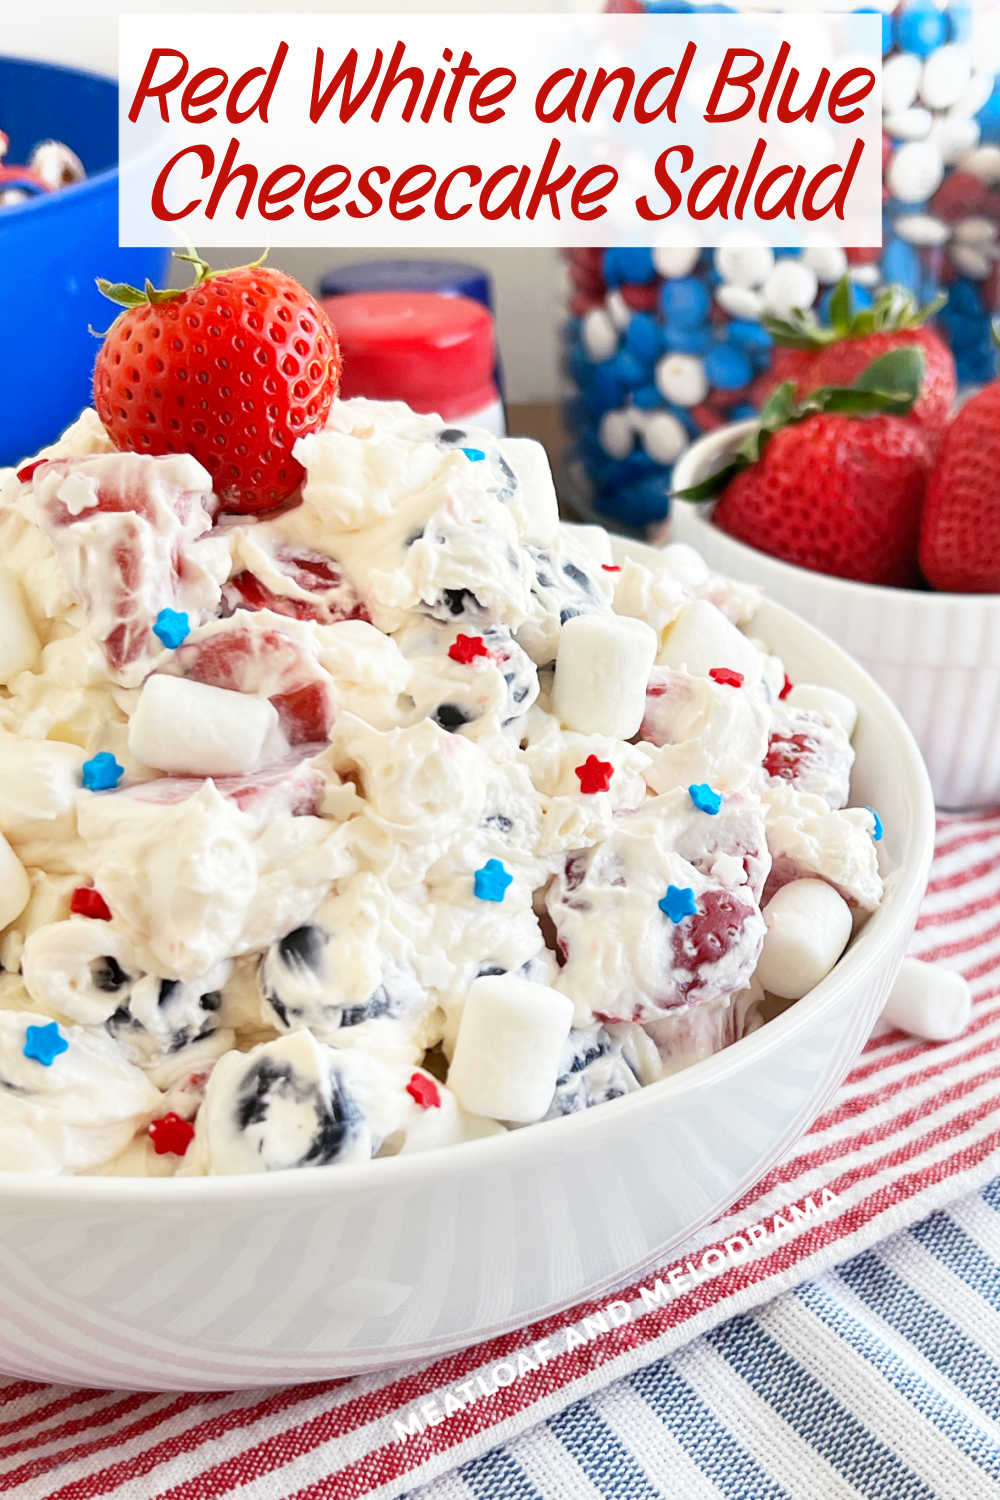 This Red White and Blue Cheesecake Salad recipe is an easy dessert salad with fresh strawberries and blueberries in a creamy cheesecake dressing. The perfect patriotic dessert or side dish for Memorial Day and Fourth of July! via @meamel